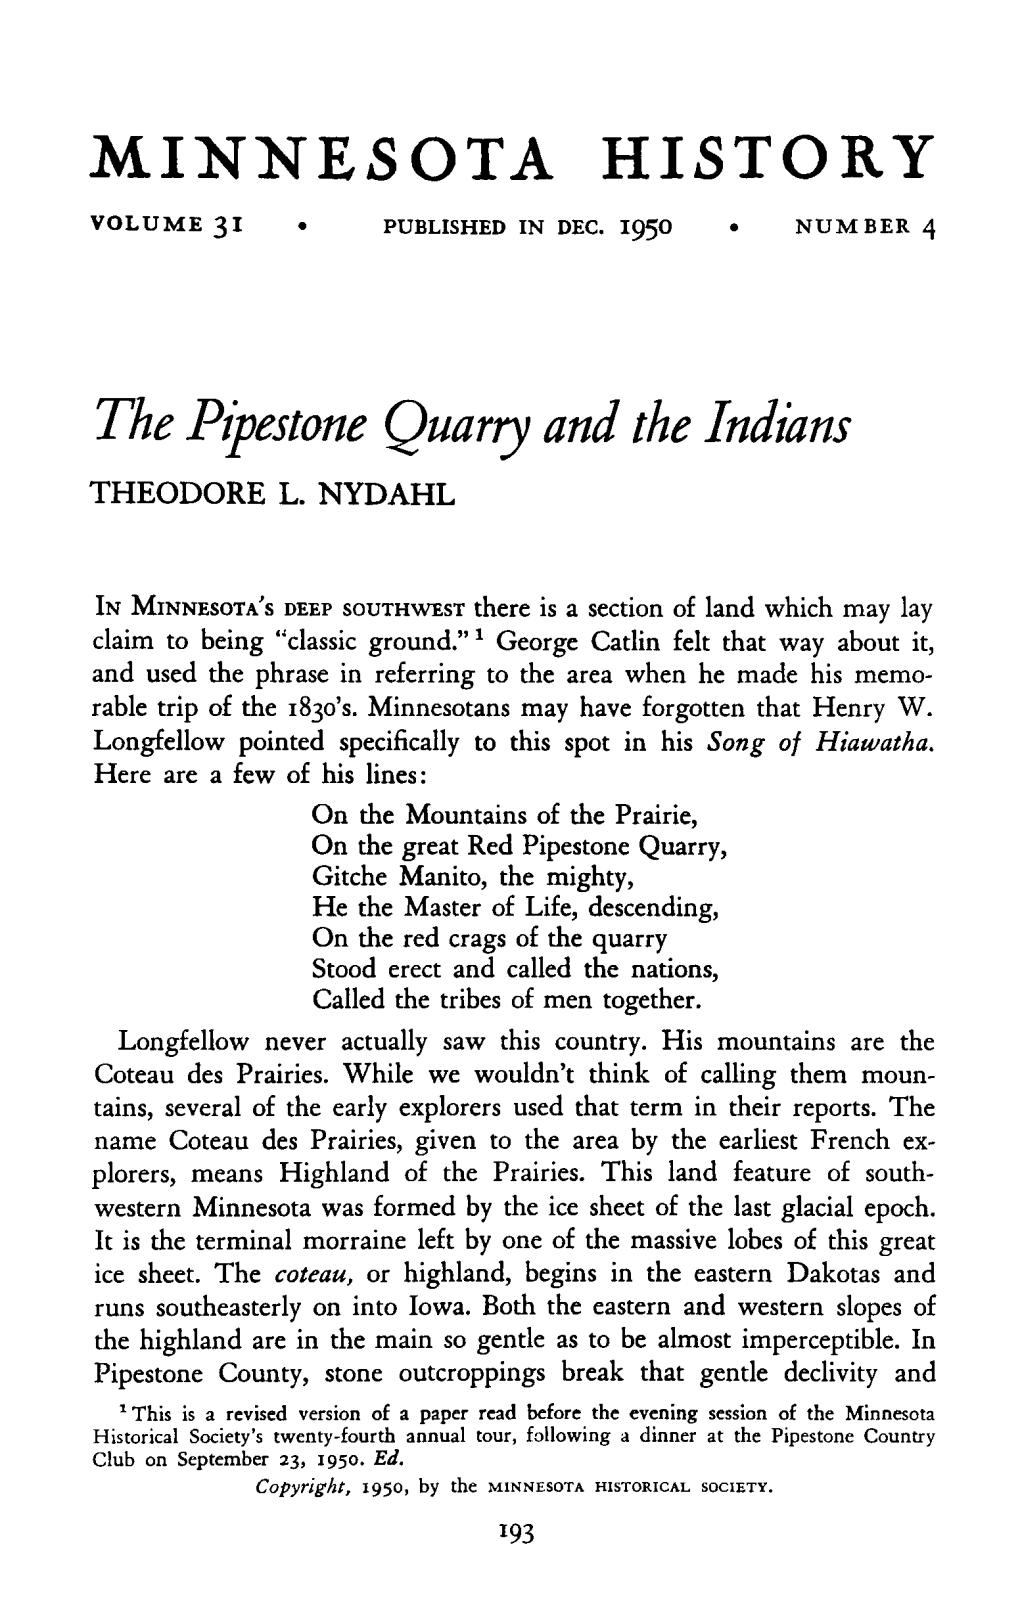 The Pipestone Quarry and the Indians